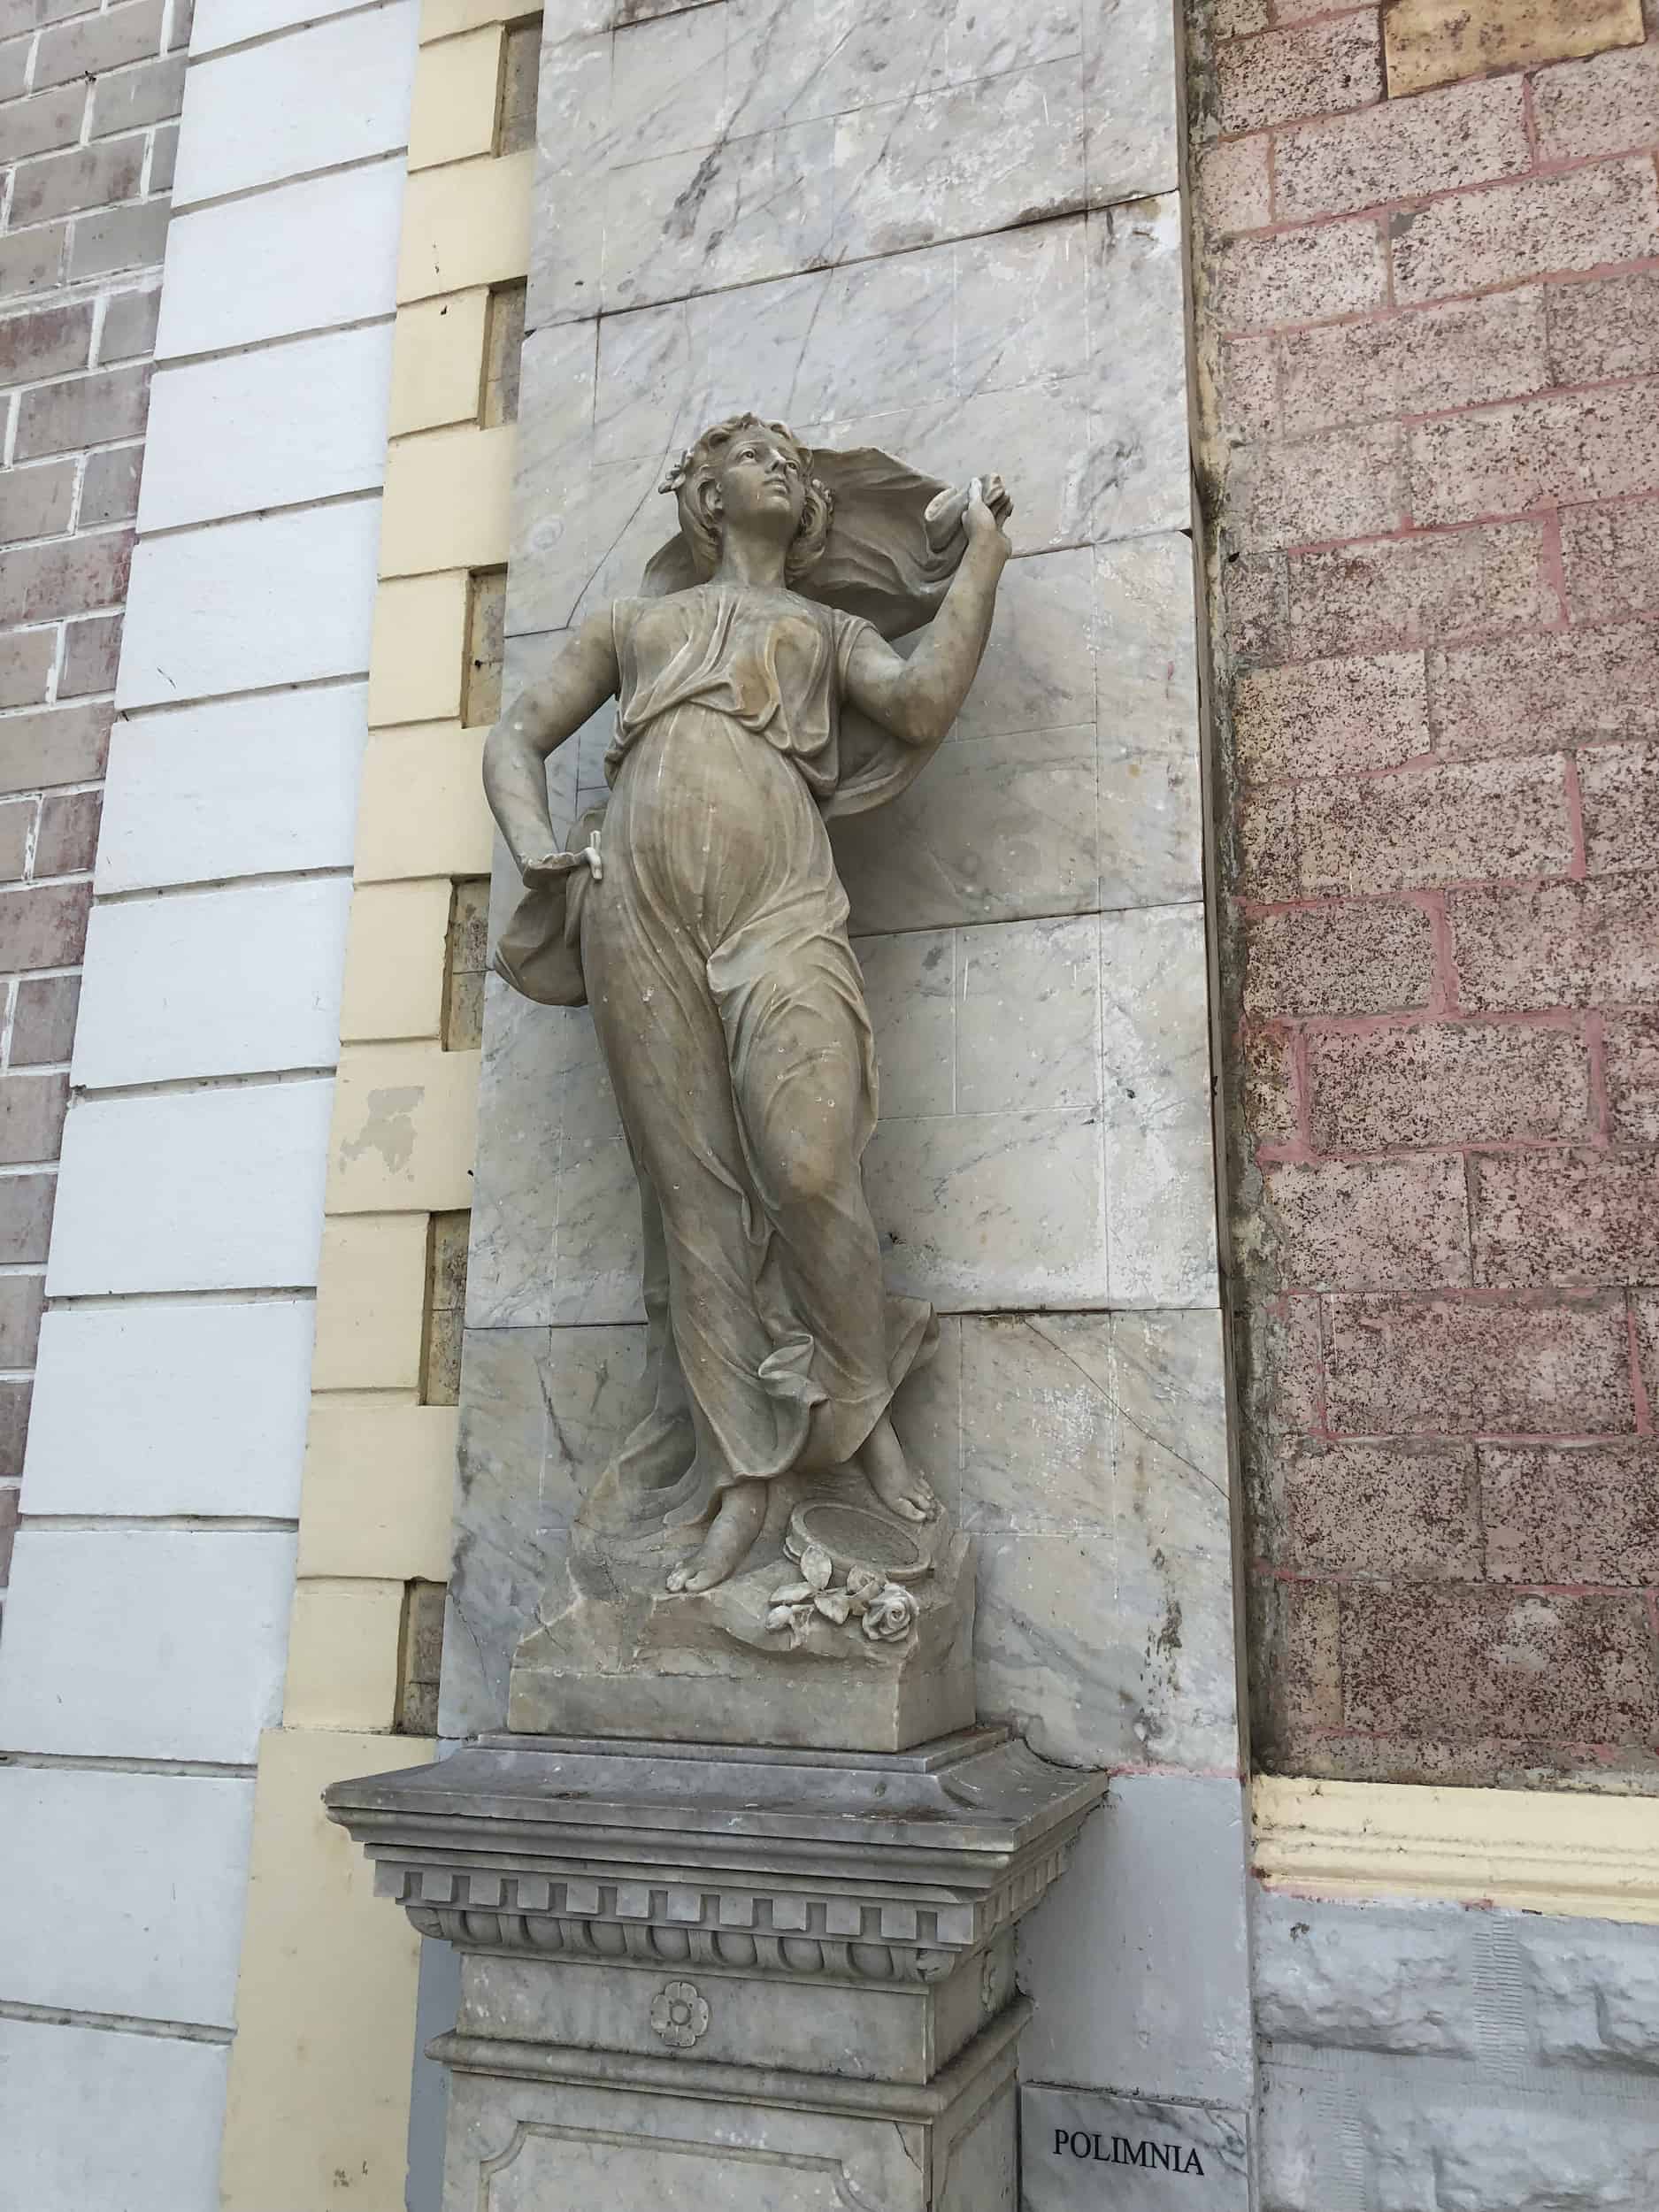 Sculpture outside the Heredia Theatre